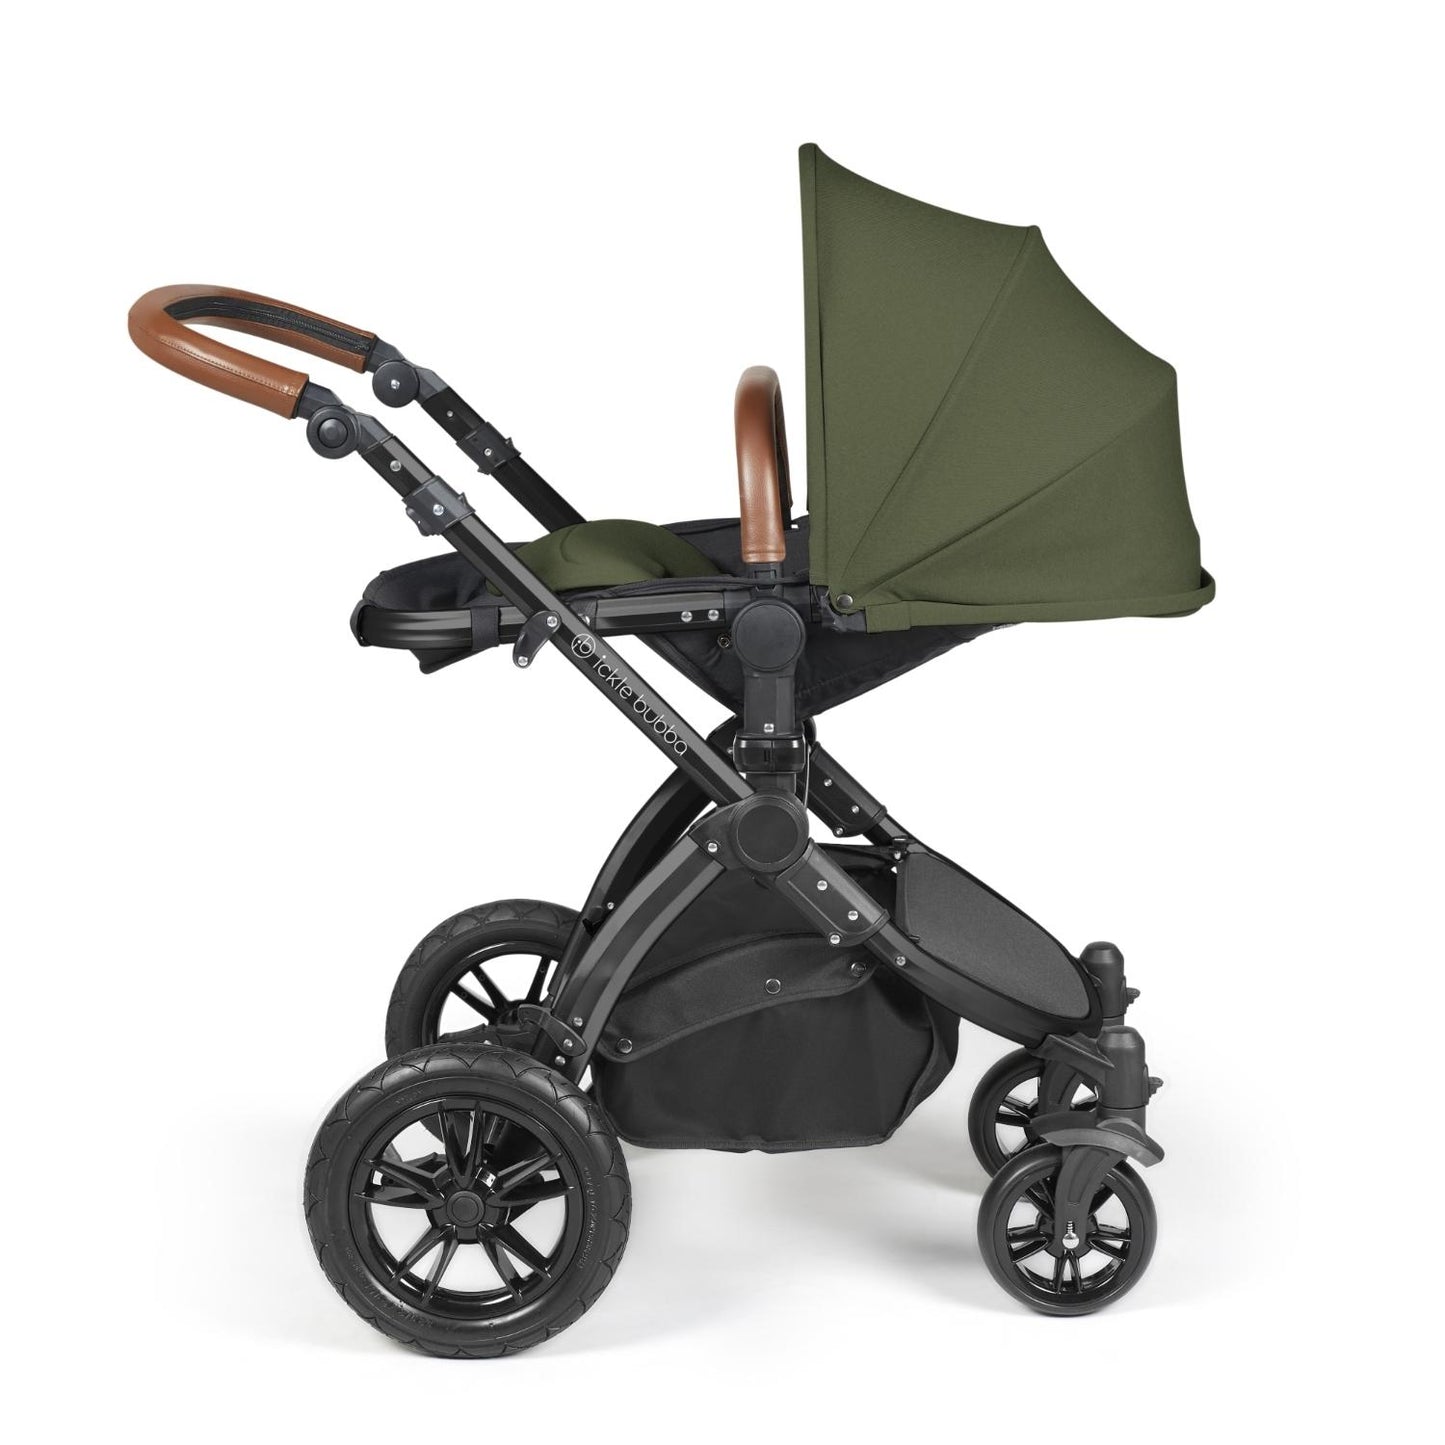 Side view of Ickle Bubba Stomp Luxe Pushchair with seat unit attached in Woodland green colour with tan handle